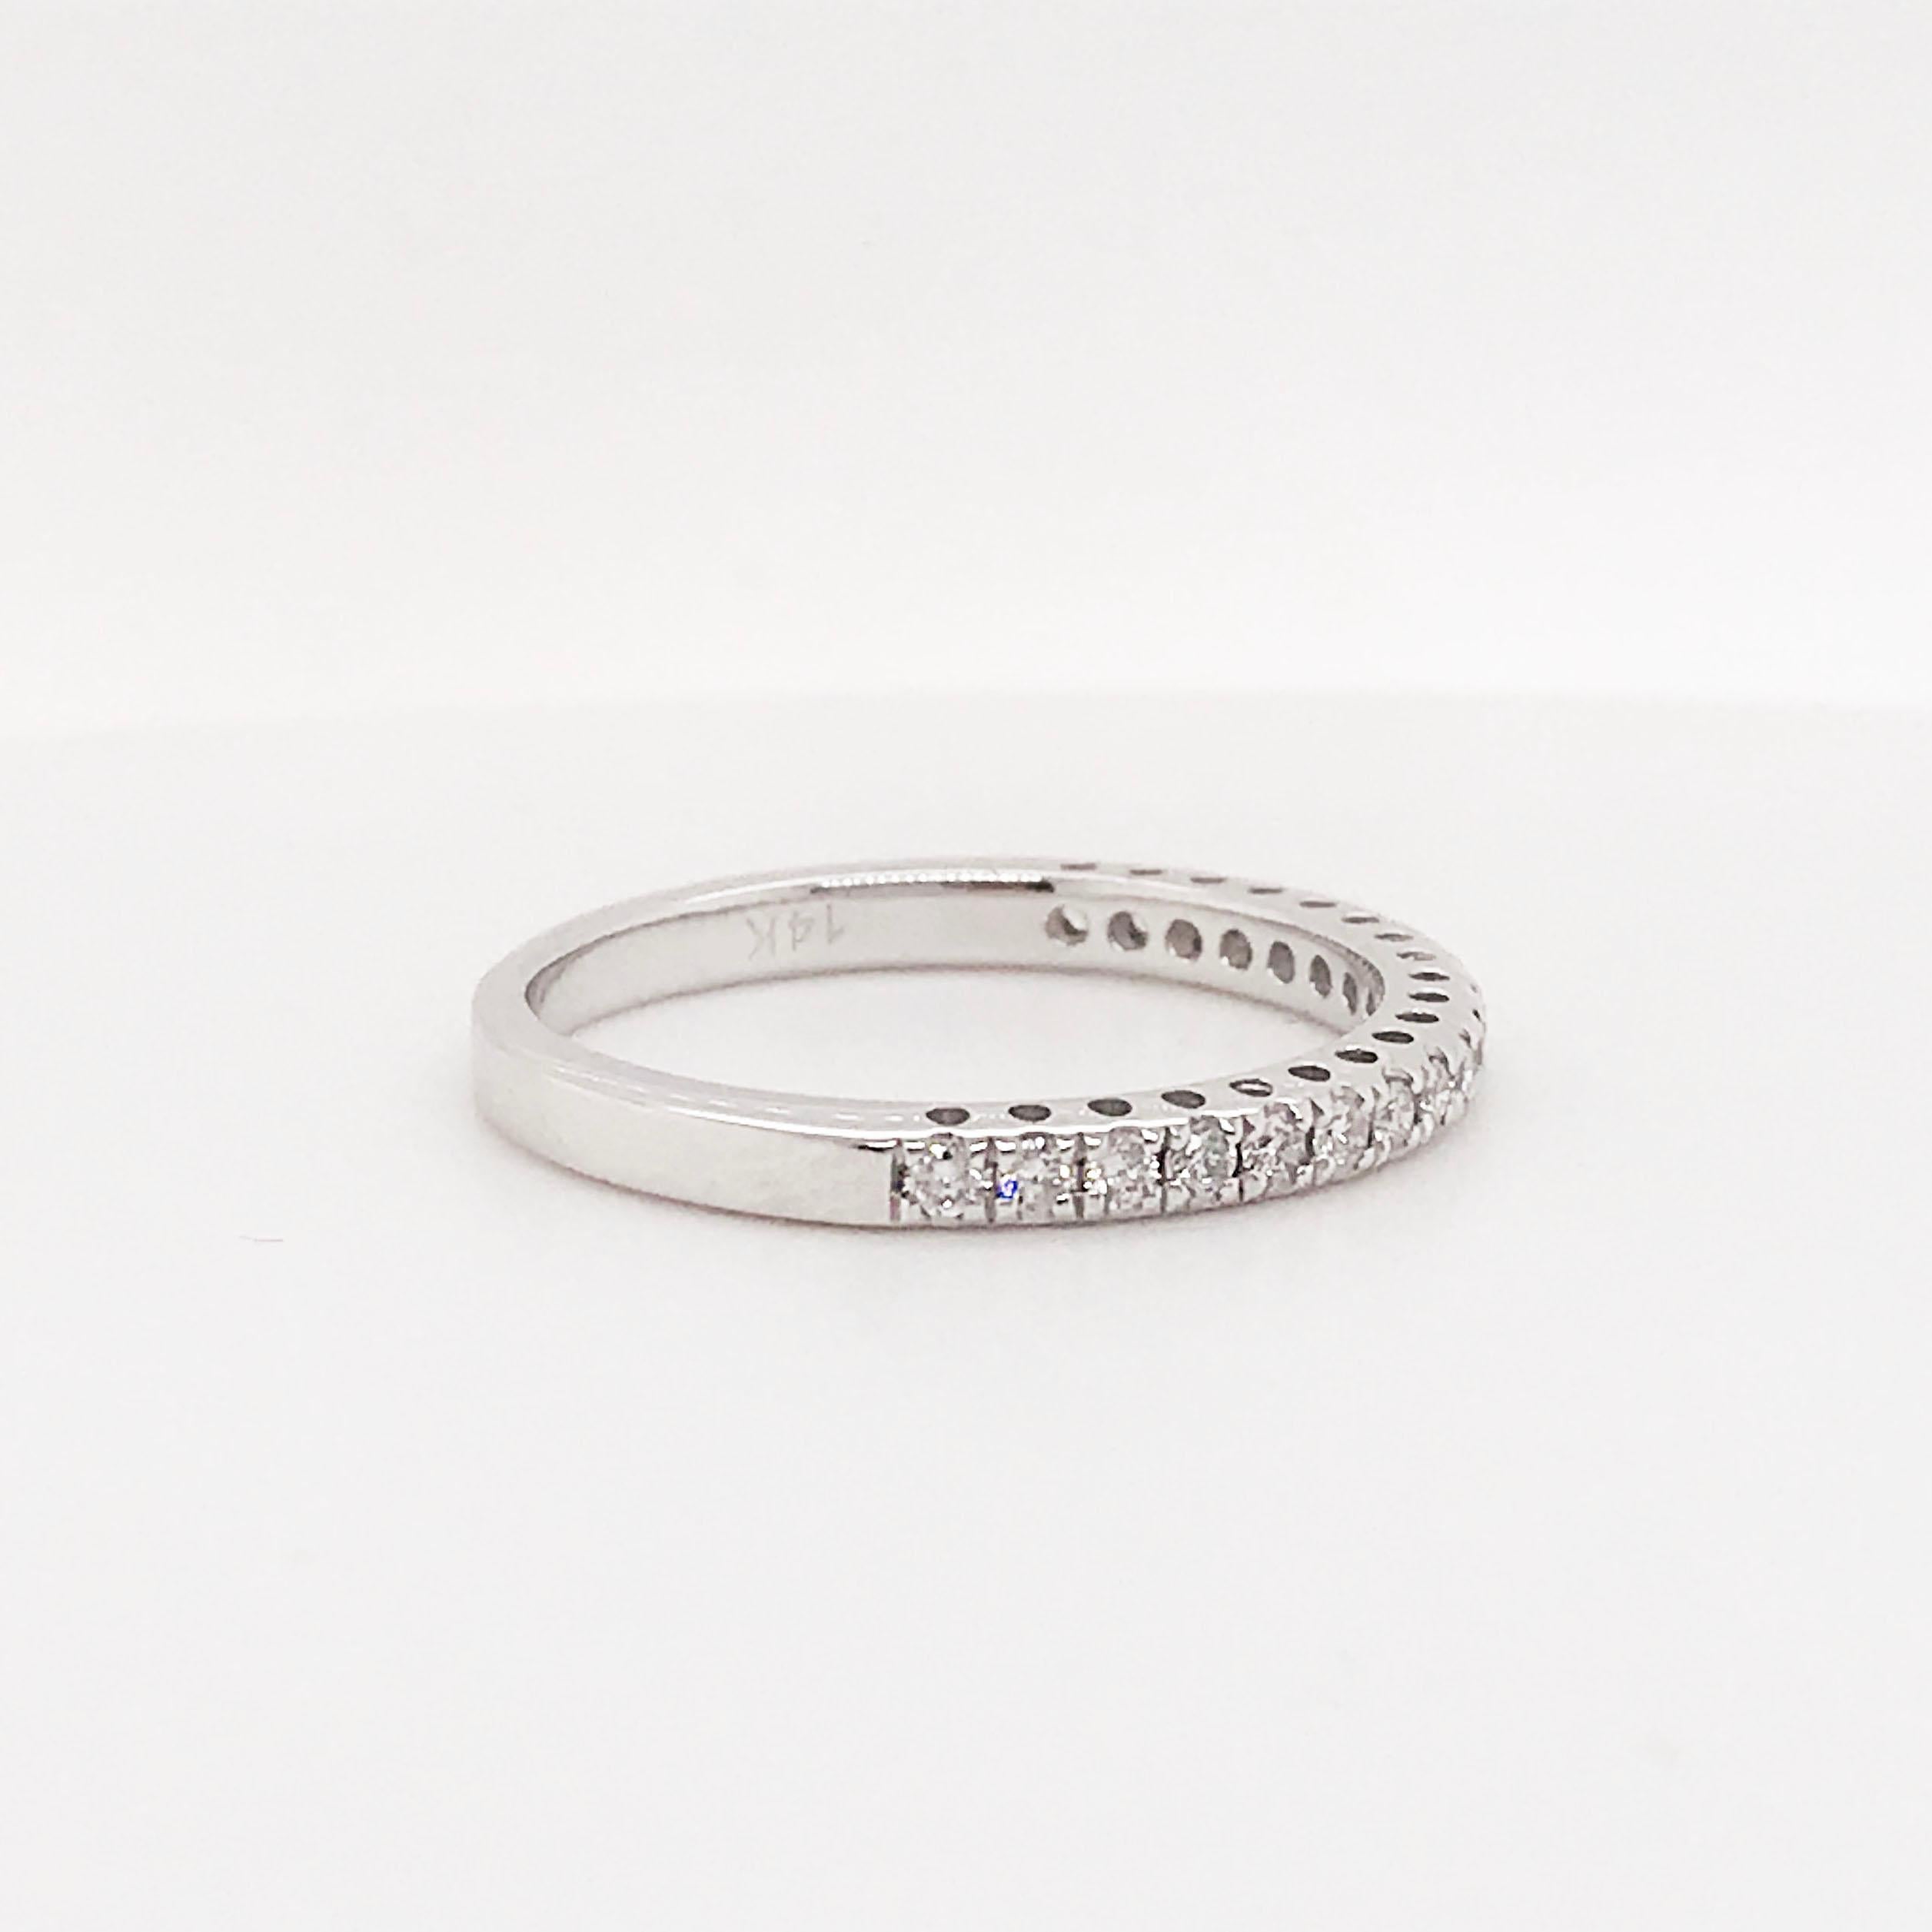 This amazing 14 kt gold band is our best selling diamond band!  It is a half eternity band features a row of diamonds that go half way around the band and there set with four prongs on each diamond.  The diamonds are set securely so that you don’t